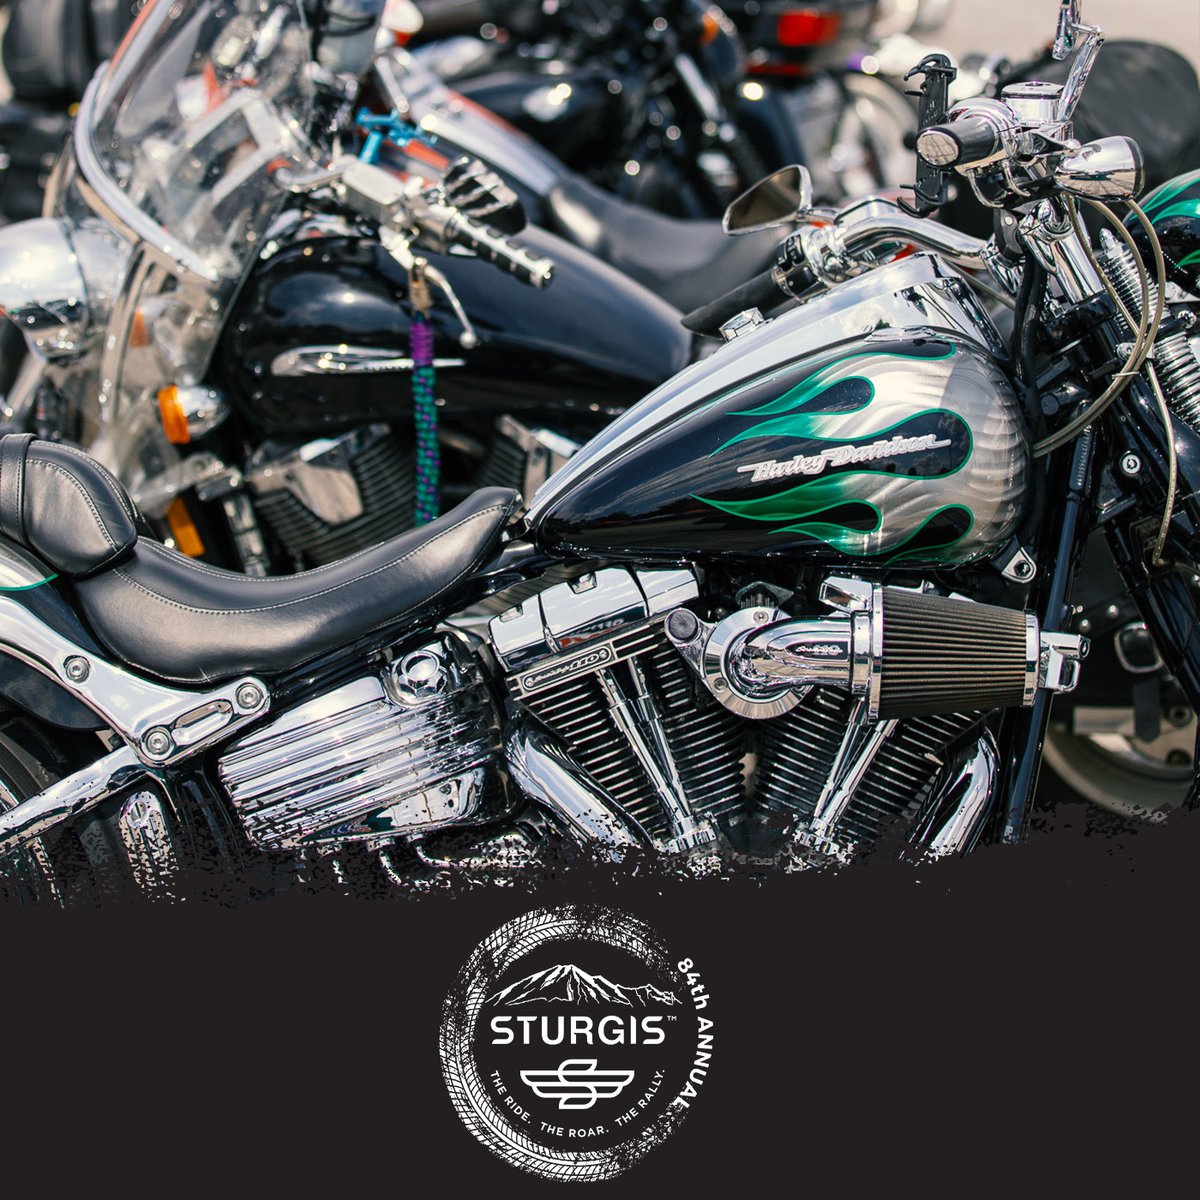 Only 3 more months until bikes line the streets of Sturgis! - #sturgis #sturgisrally